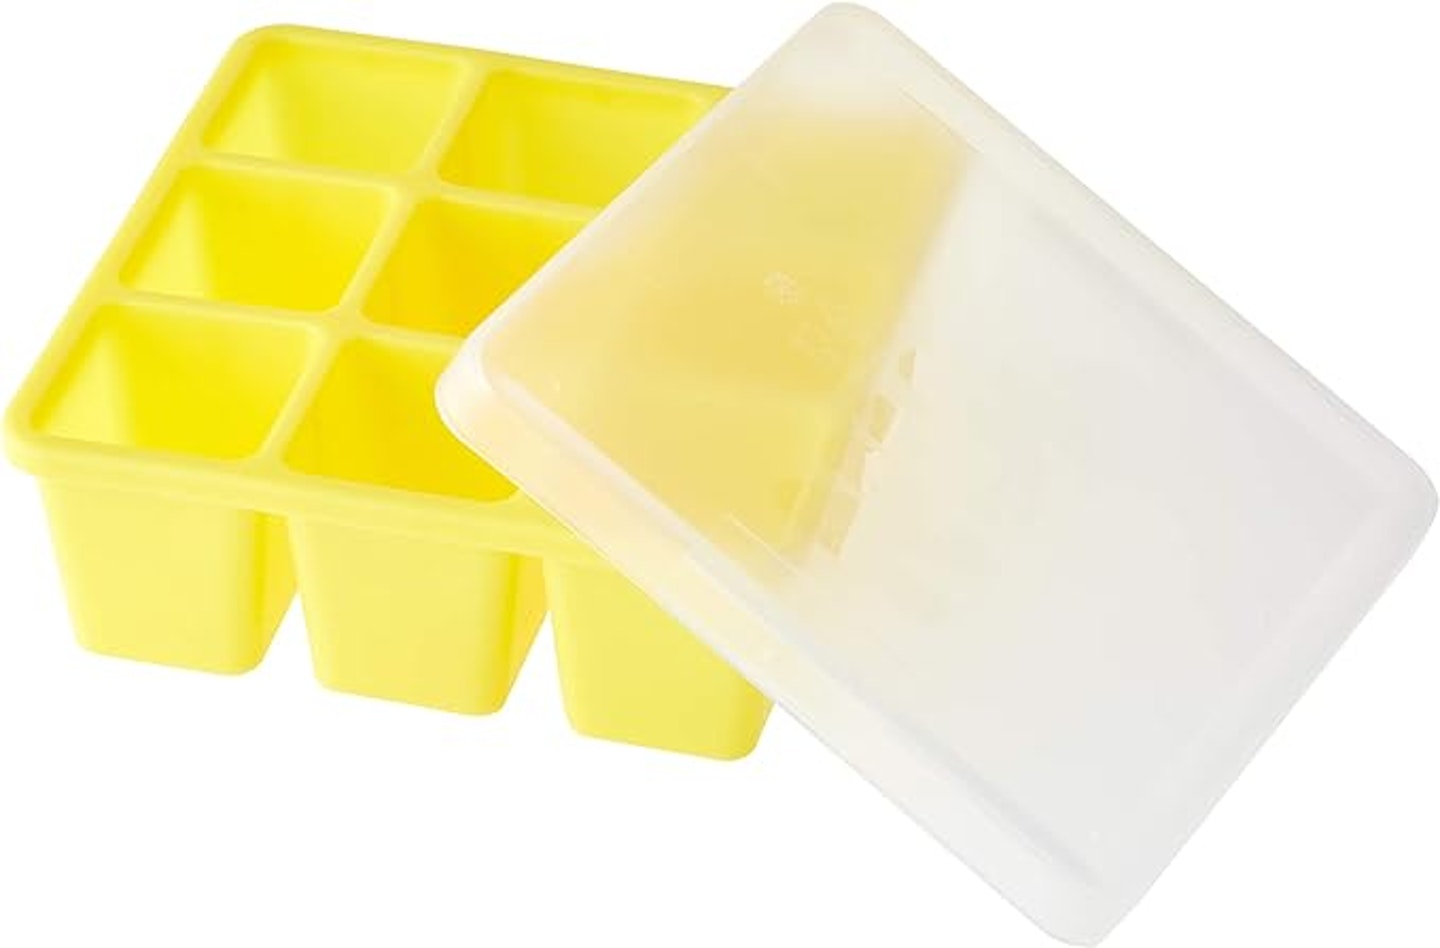 NUK Food Cube Tray with Lid